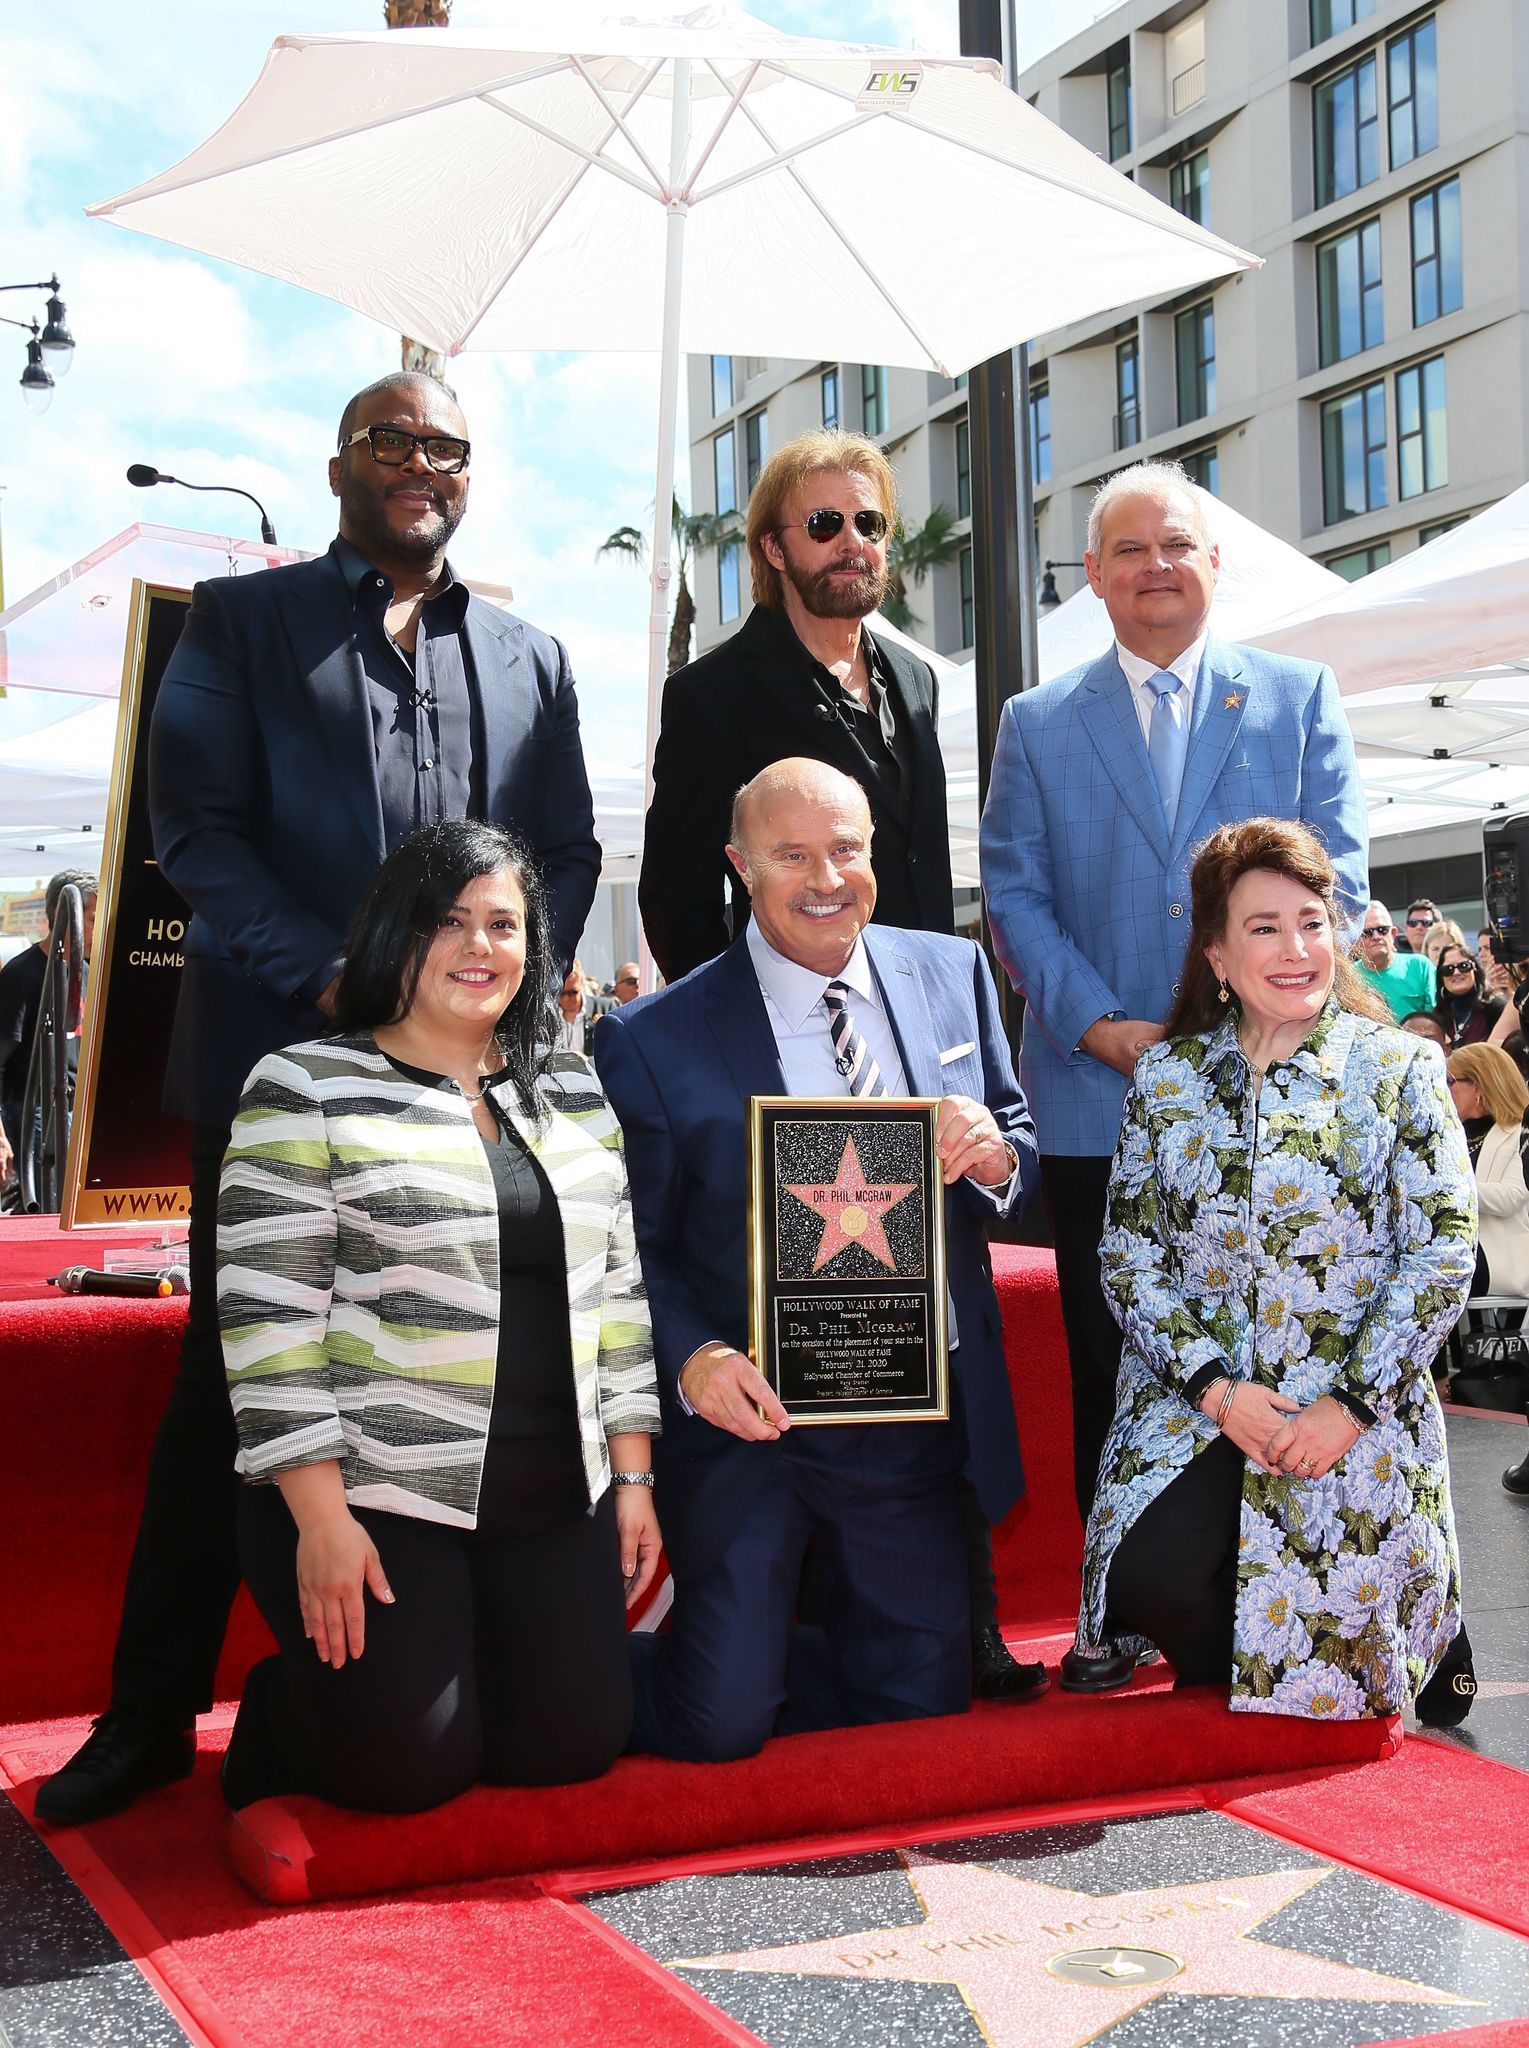 Tyler Perry, top left; Dr. Phil McGraw, bottom center; Ronnie Dunn, top center; and others attend a ceremony honoring lauded TV personality Dr. Phil with a star on the Hollywood Walk of Fame on Feb. 21, 2020, in Los Angeles, Calif. Dr. Phil celebrated the 3,000th episode of his eponymous show on Sept. 24, 2019, after 17 seasons and almost 20,000 guests.